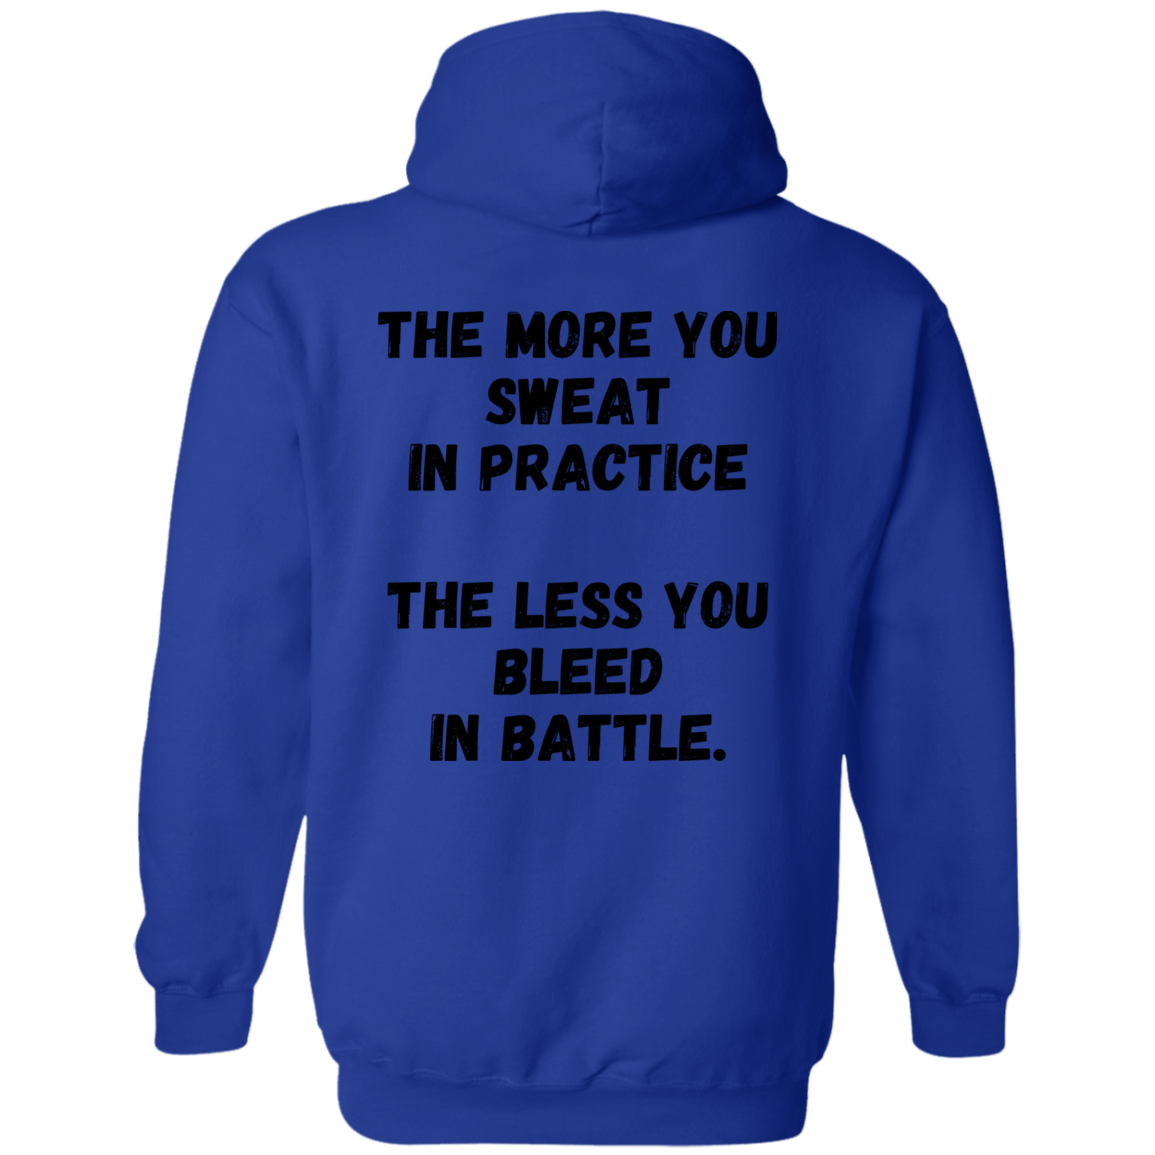 The More You Sweat In Practice, The Less You Bleed In Battle - Unisex Pullover Hoodie